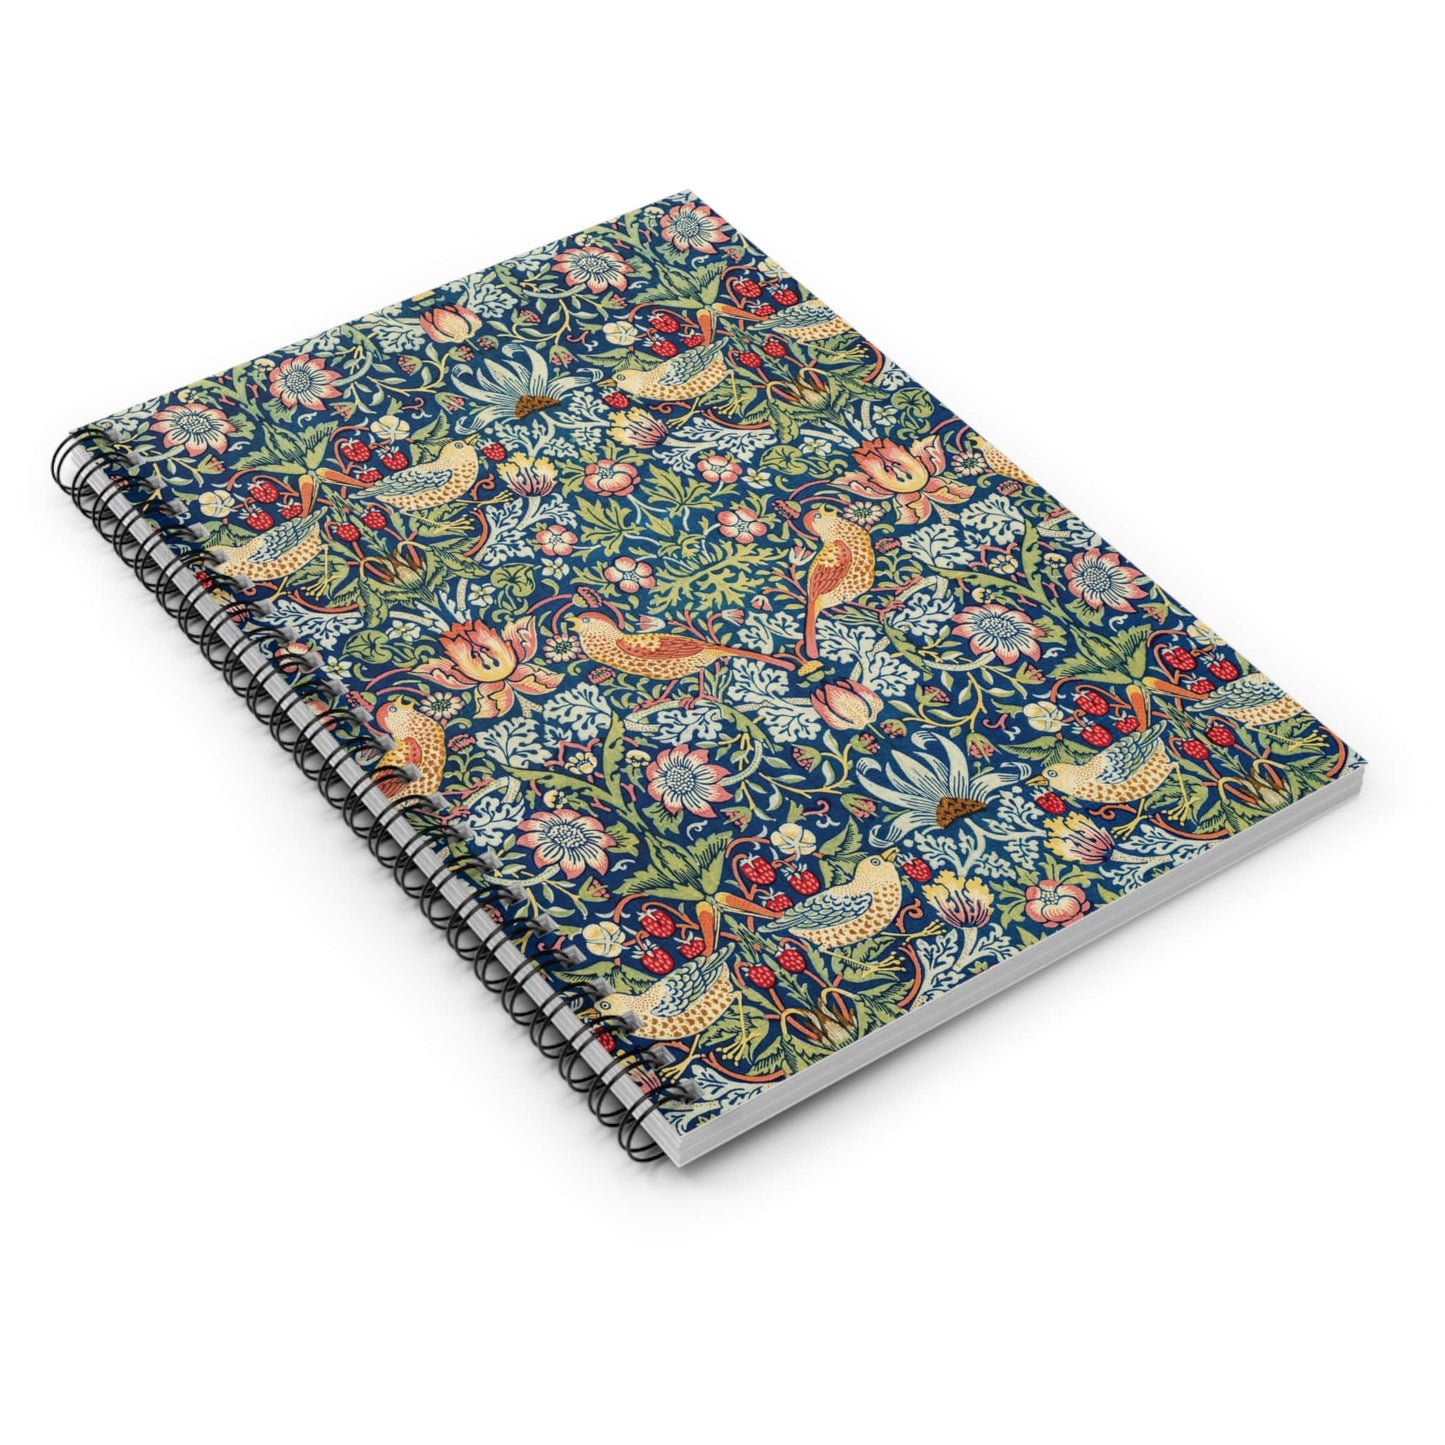 Birds and Plants Spiral Notebook Laying Flat on White Surface